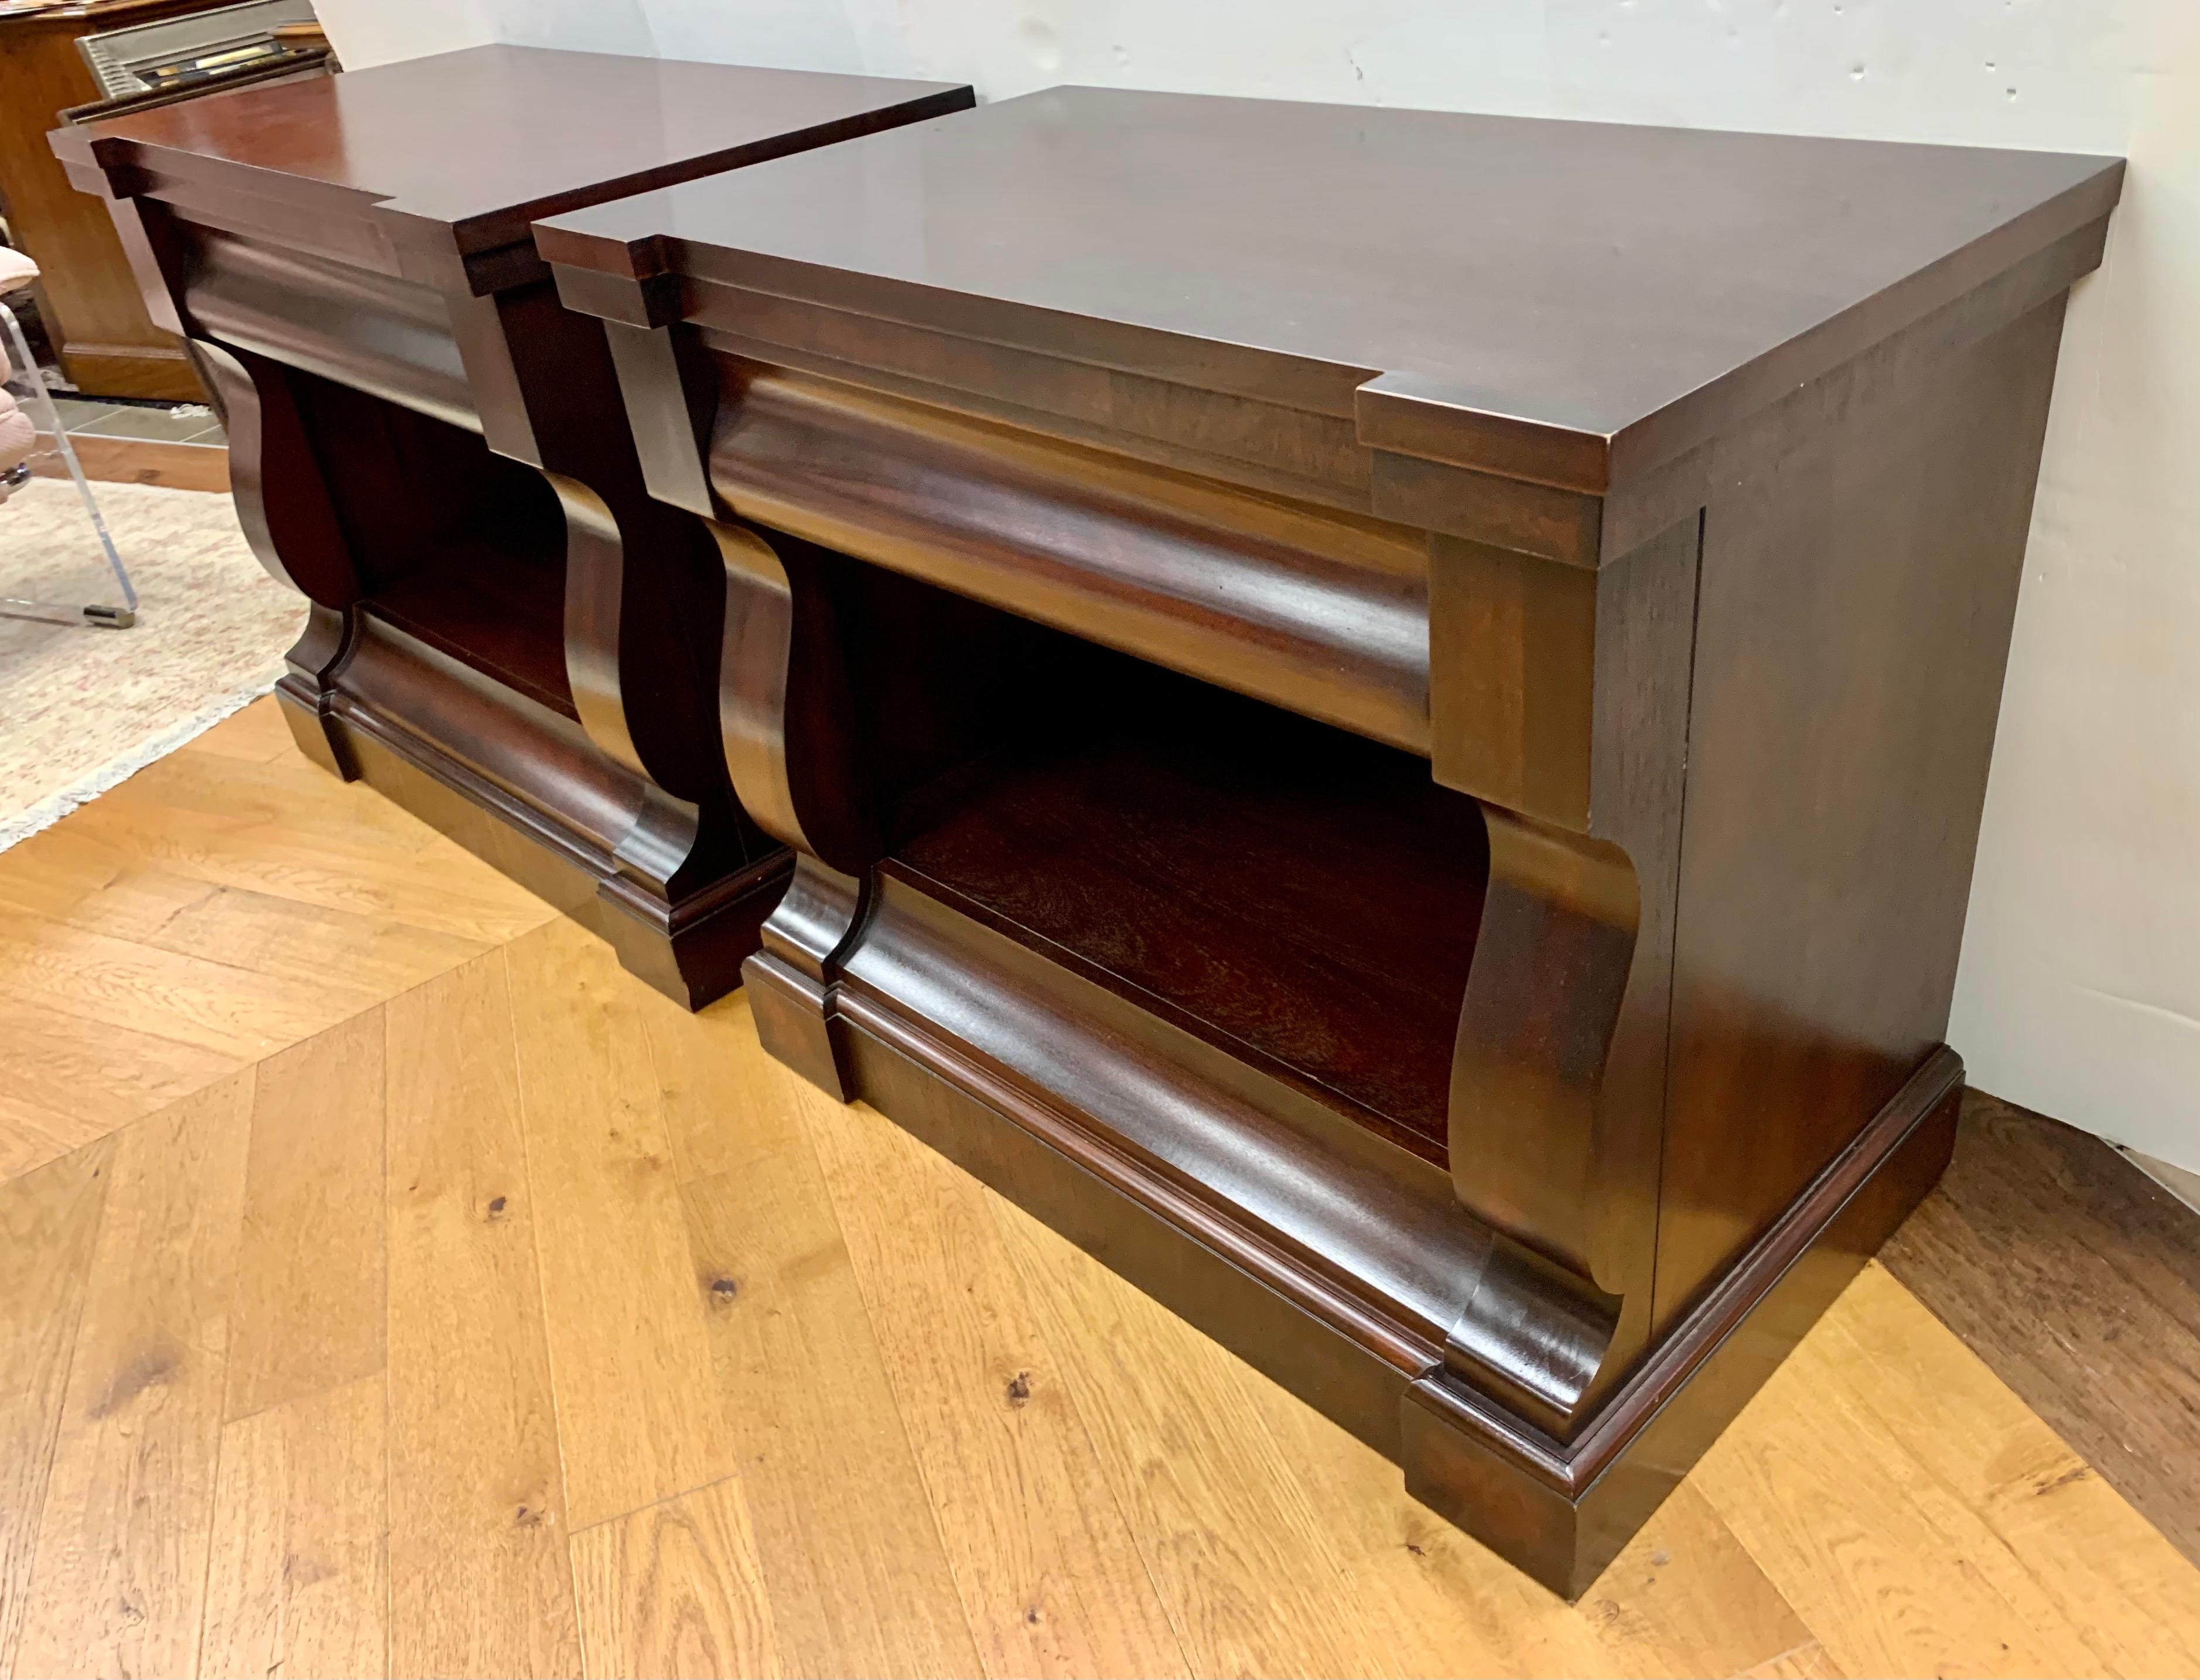 A pair of Ralph Lauren large mahogany empire style nightstands with one drawer and plenty of storage underneath. Beautifully crafted of solid wood makes the simplicity of these nightstands timeless in design and made to last for years to come.